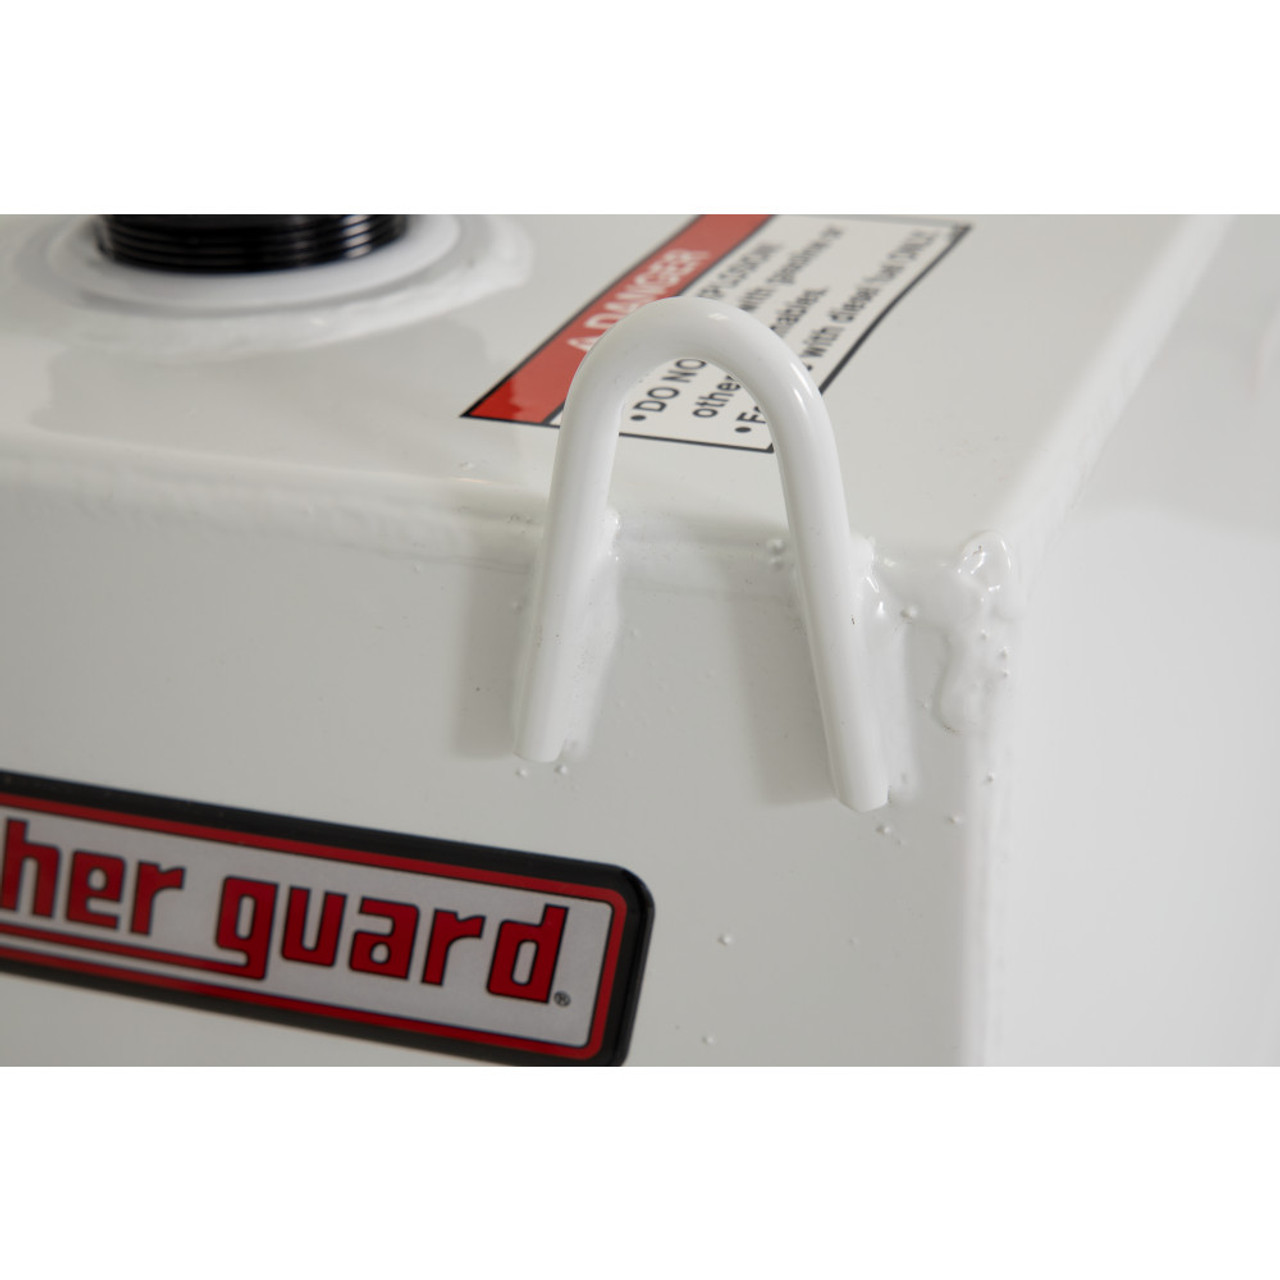 Weather Guard Model 358-X-02 Transfer Tank, Rectangle, 100 gal - Industrial  Ladder & Supply Co., Inc.